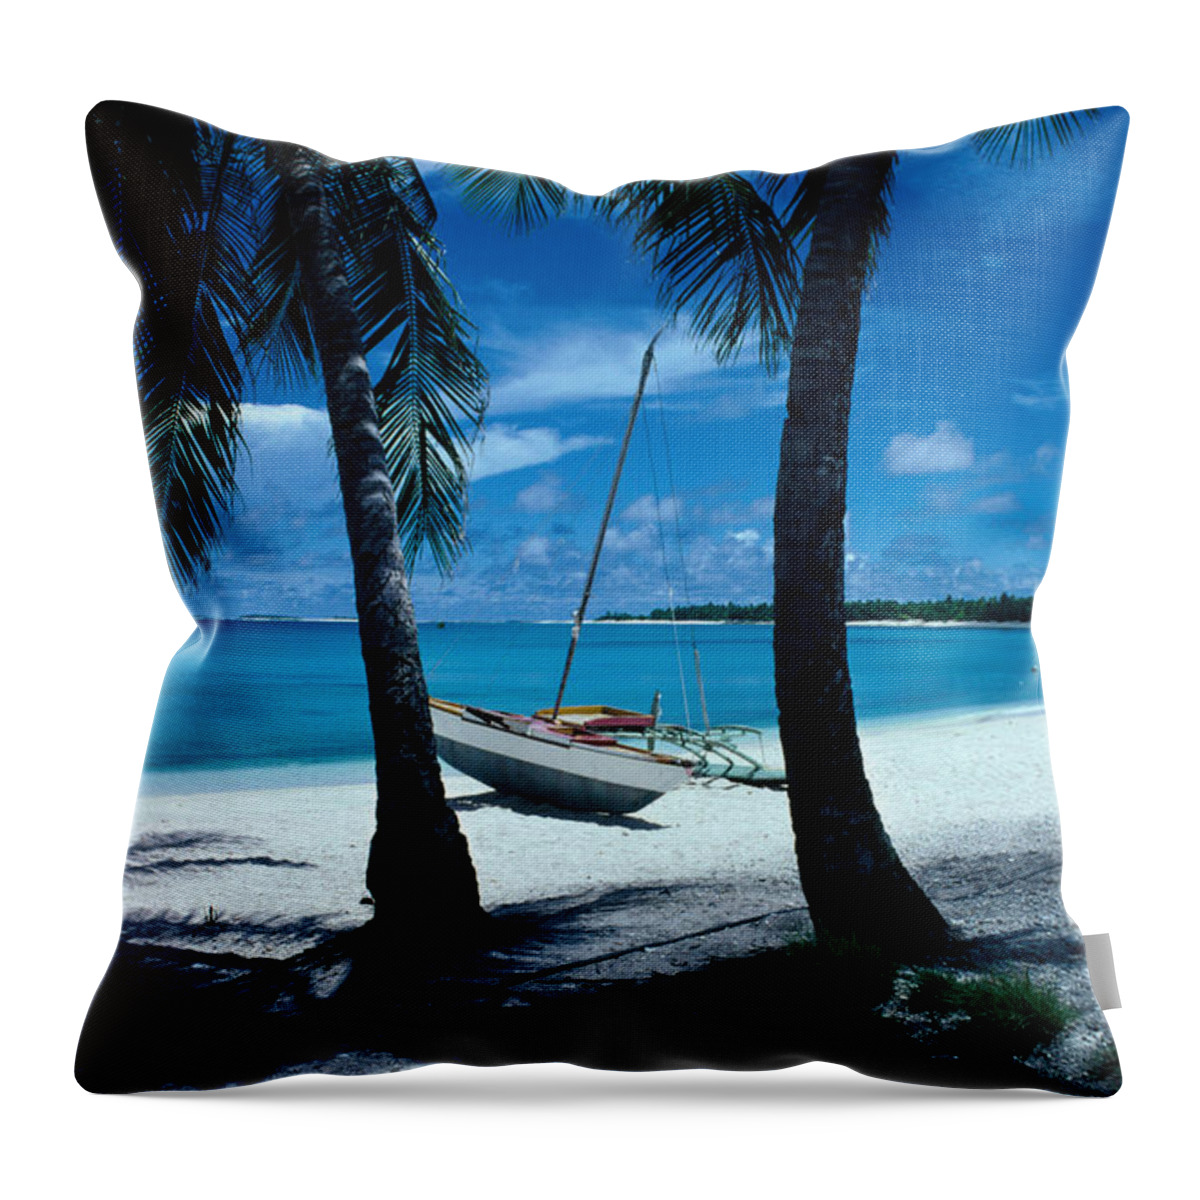 Shadow Throw Pillow featuring the photograph Outrigger Canoe On A Palm-fringed by Oliver Strewe